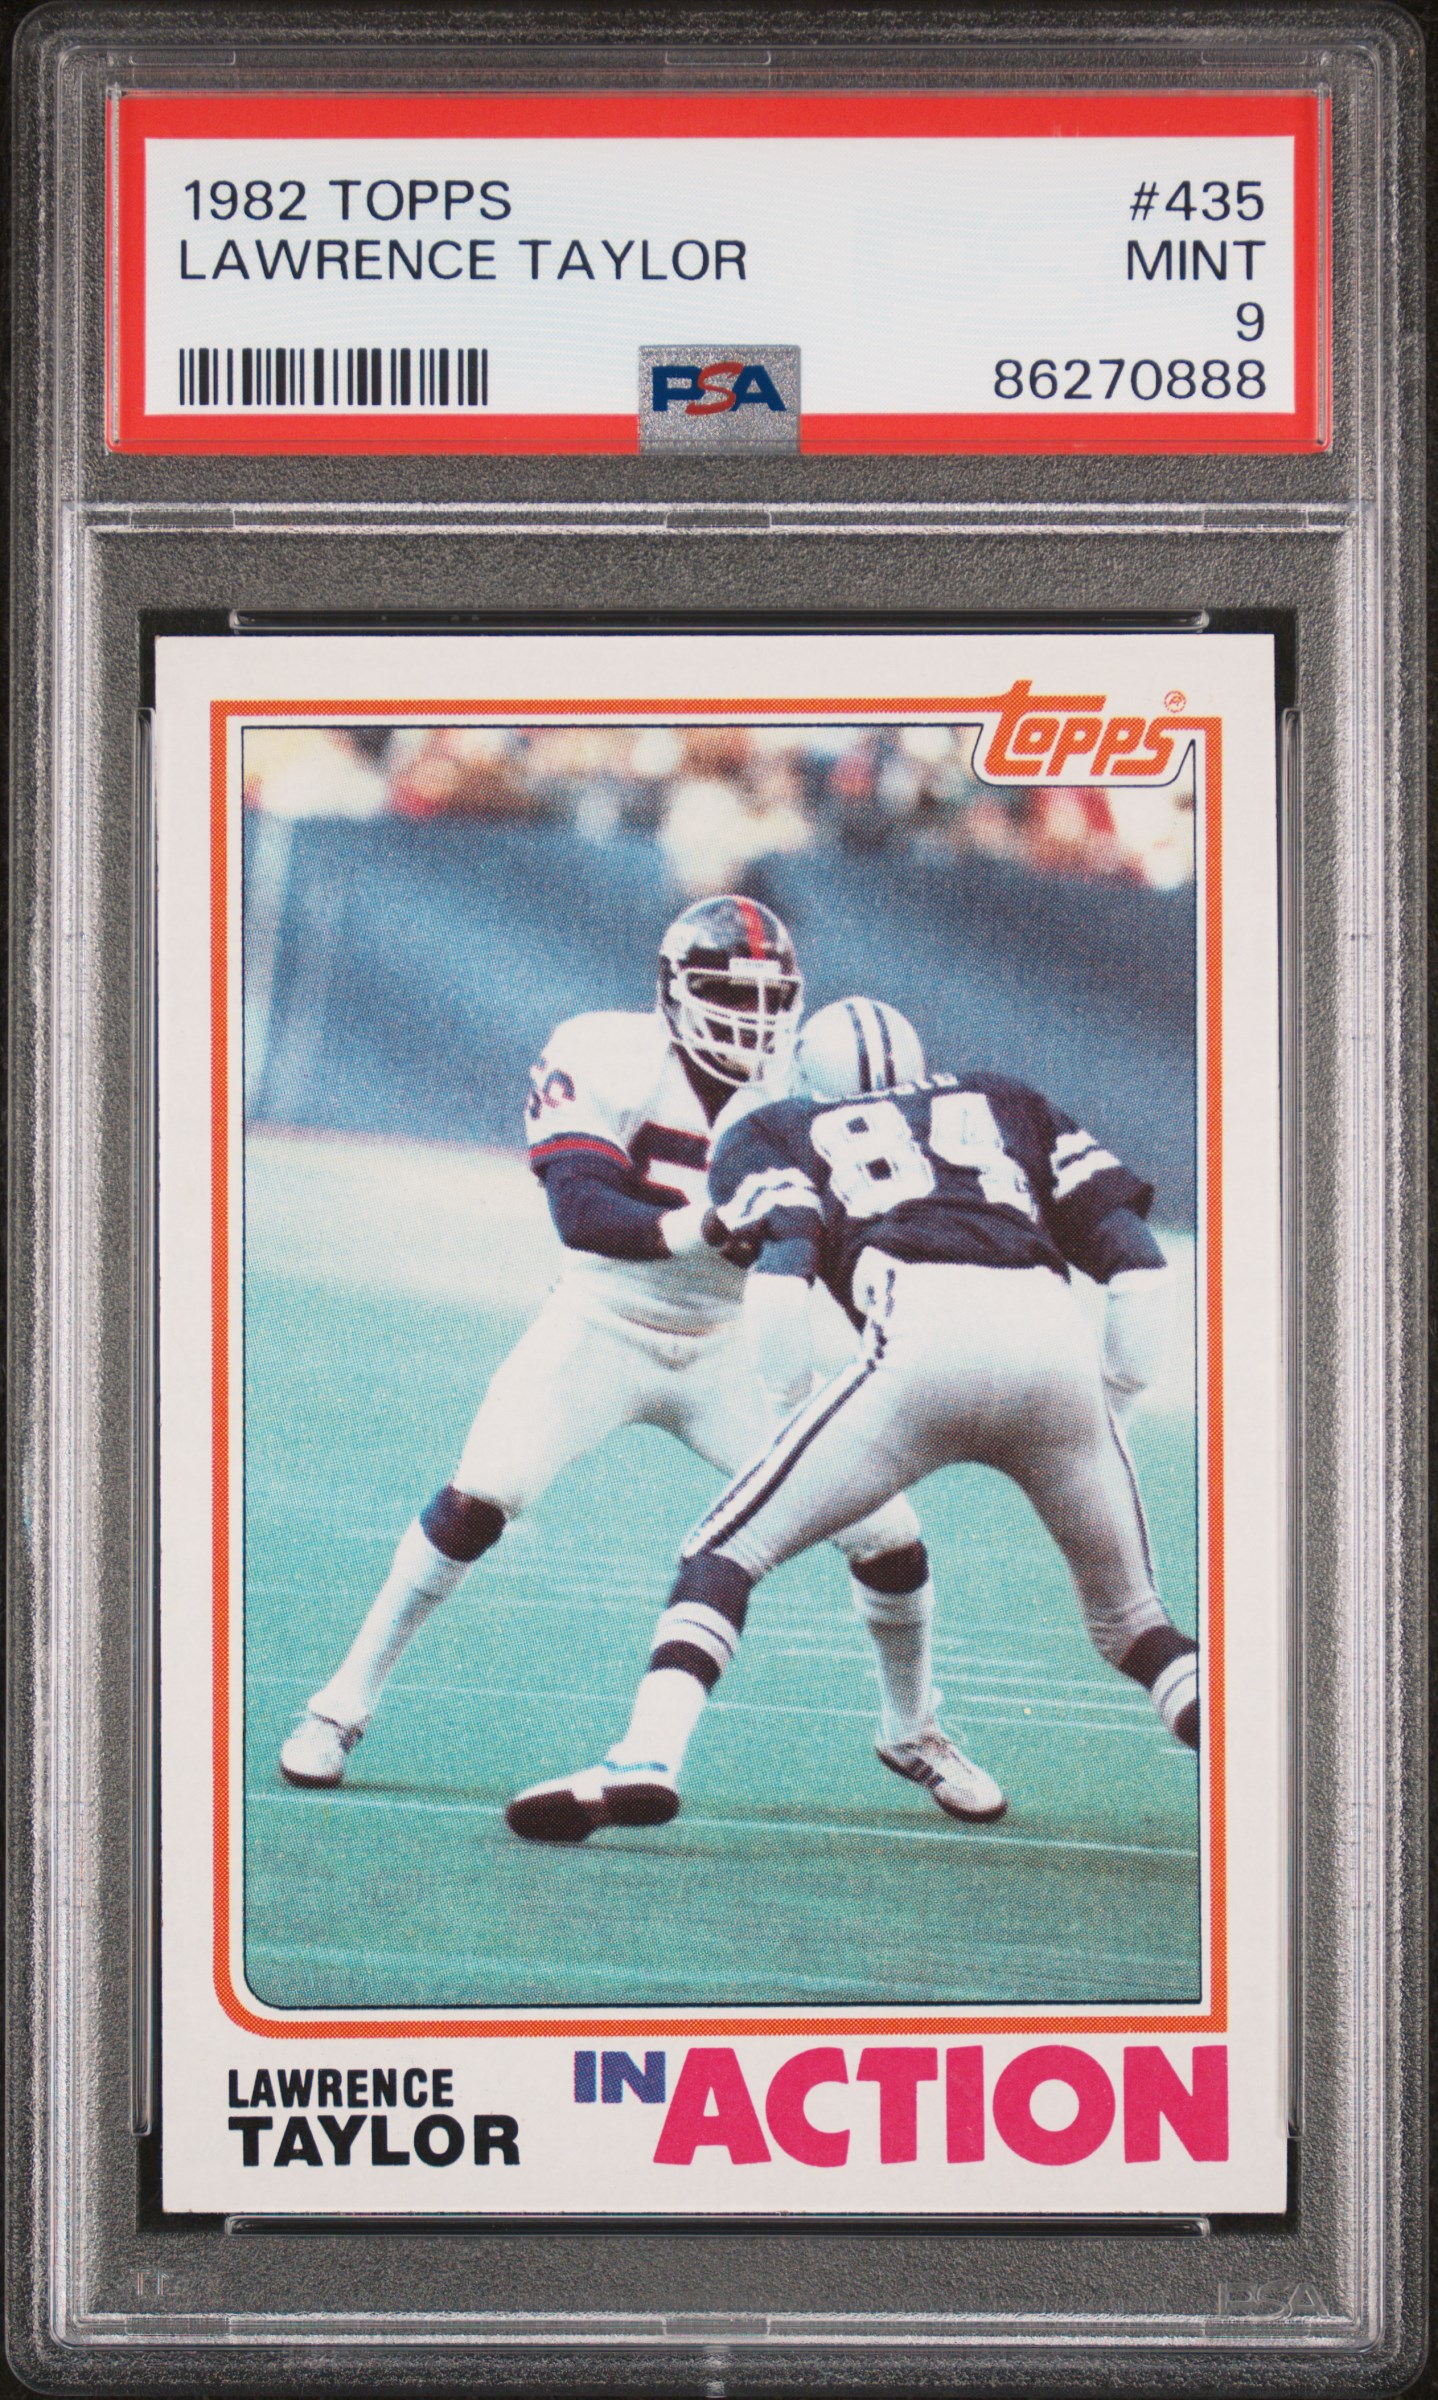 1982 Topps #435 Lawrence Taylor Rookie Card – PSA MINT 9